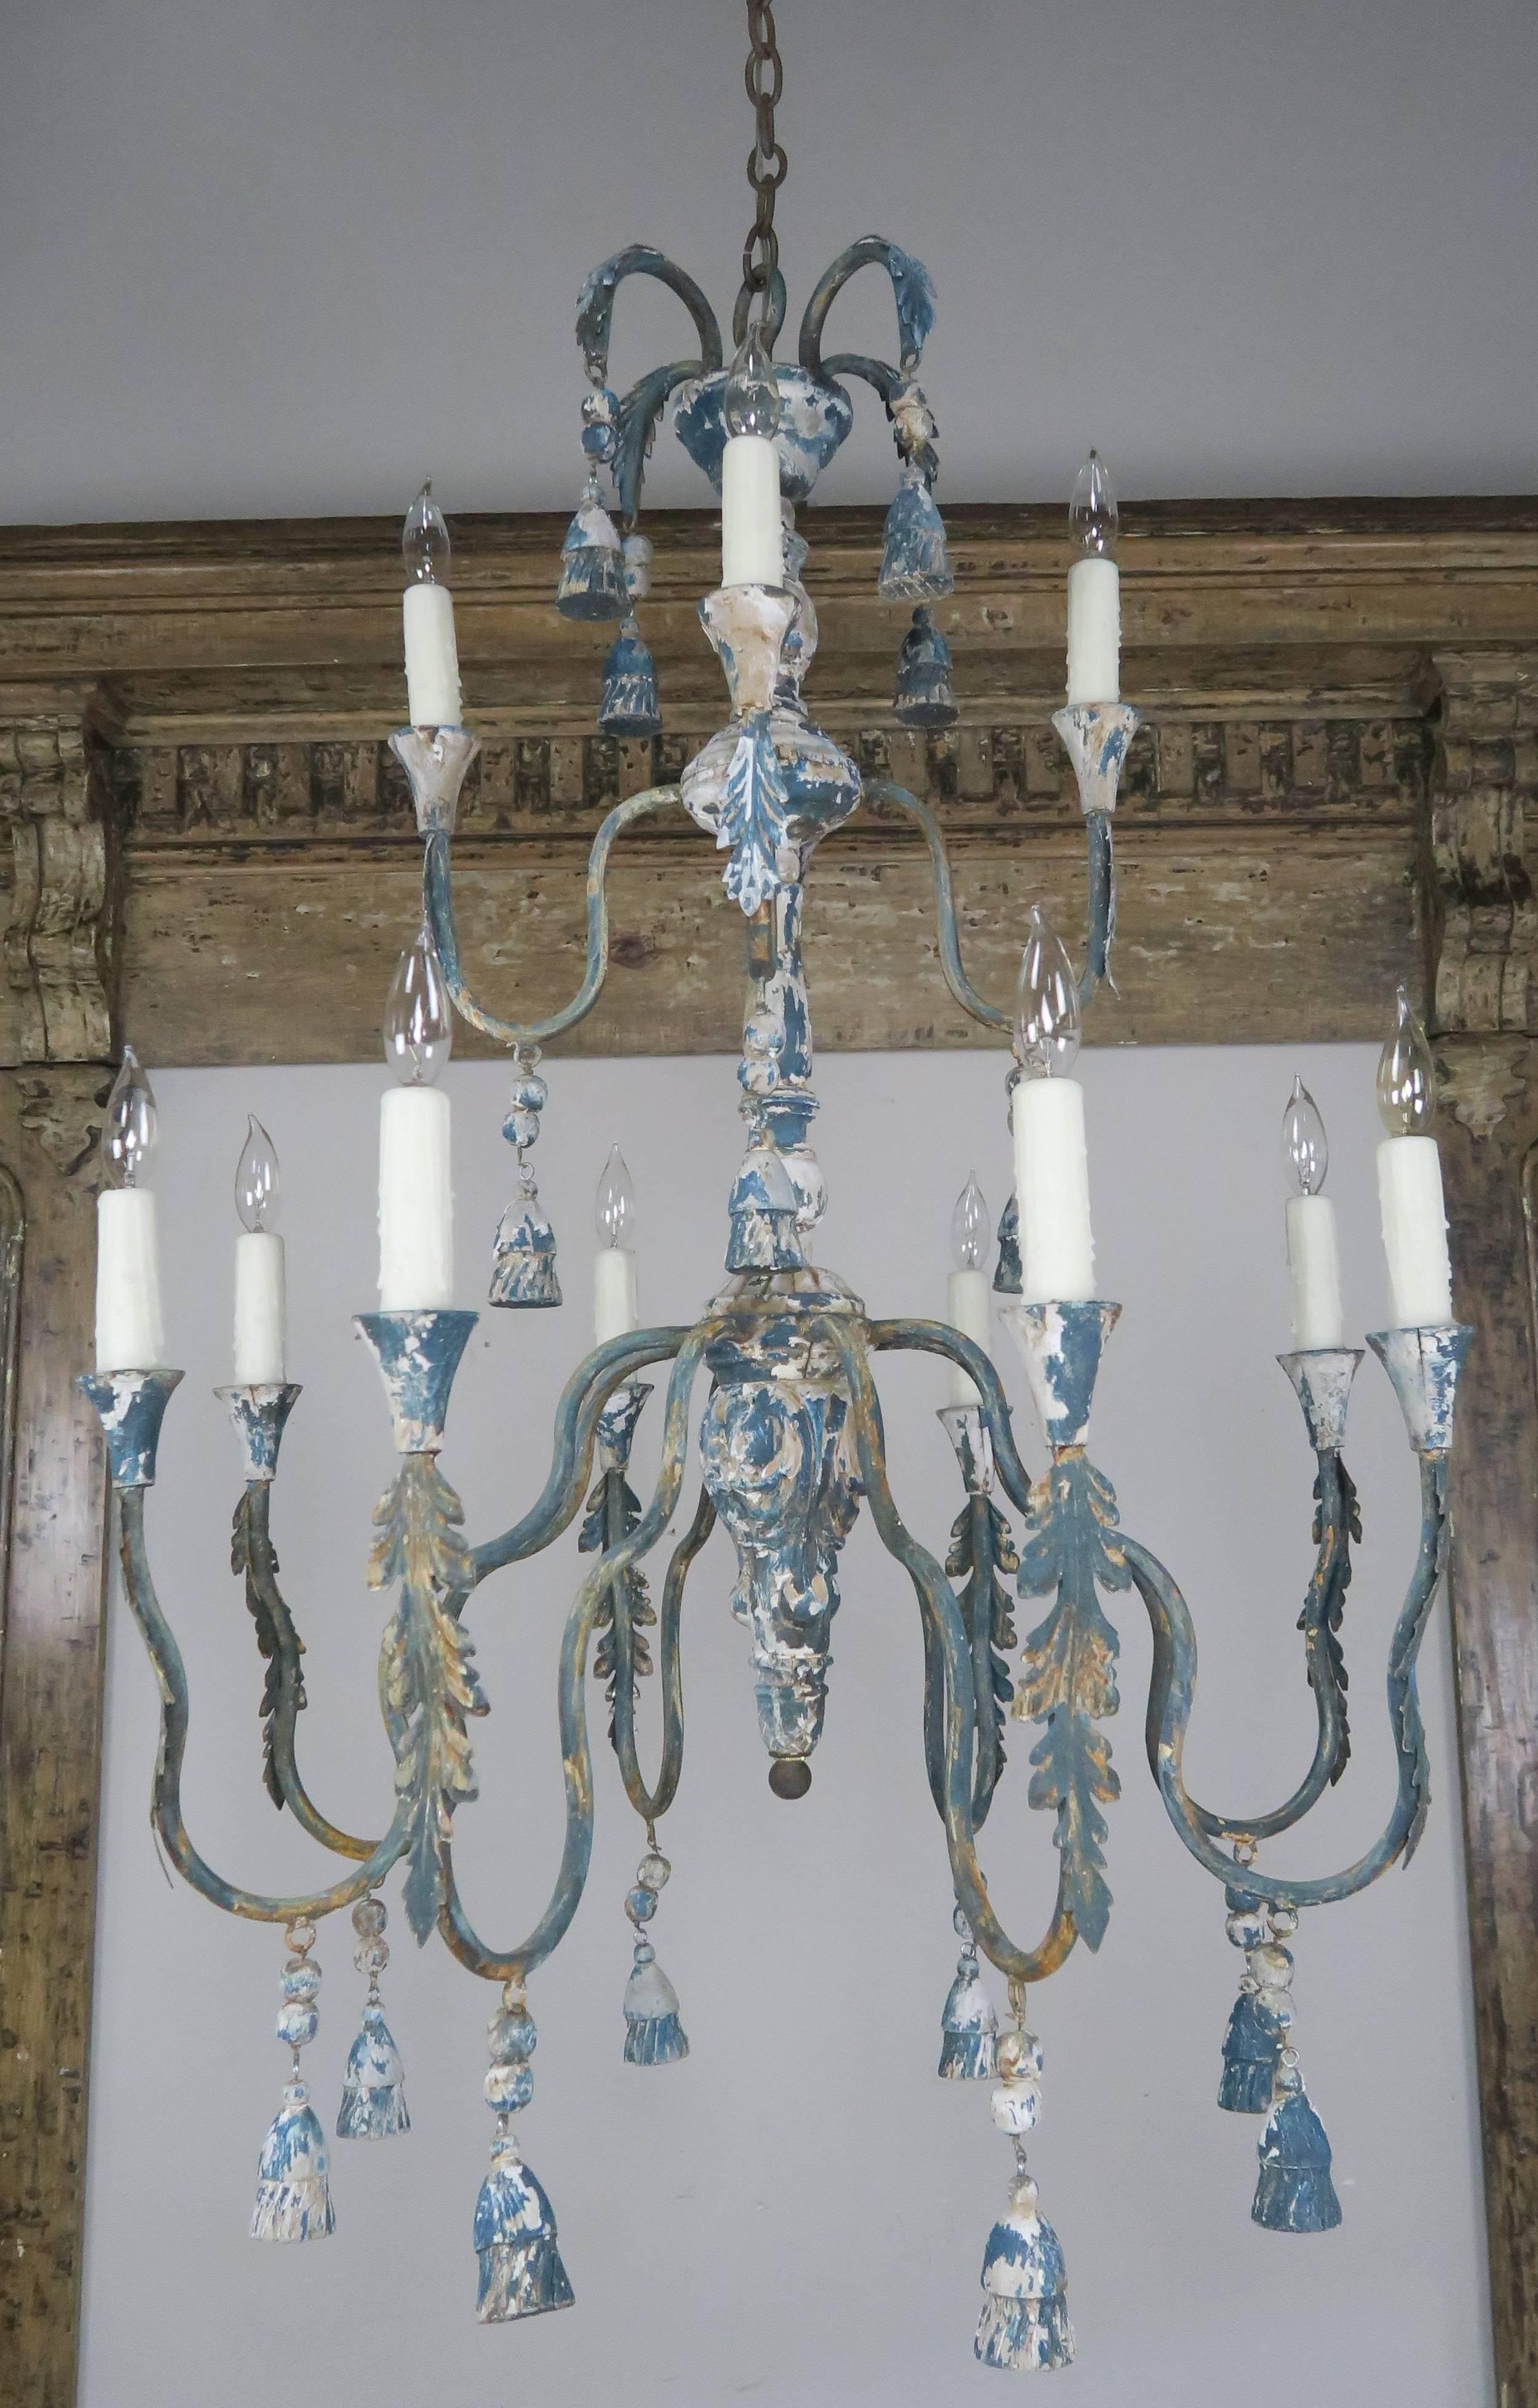 Pair of twelve-light two-tier wood and iron chandelier with carved wood tassels and iron acanthus leaf details. The fixtures have been newly rewired with drip wax candle covers. Includes chain and canopy.